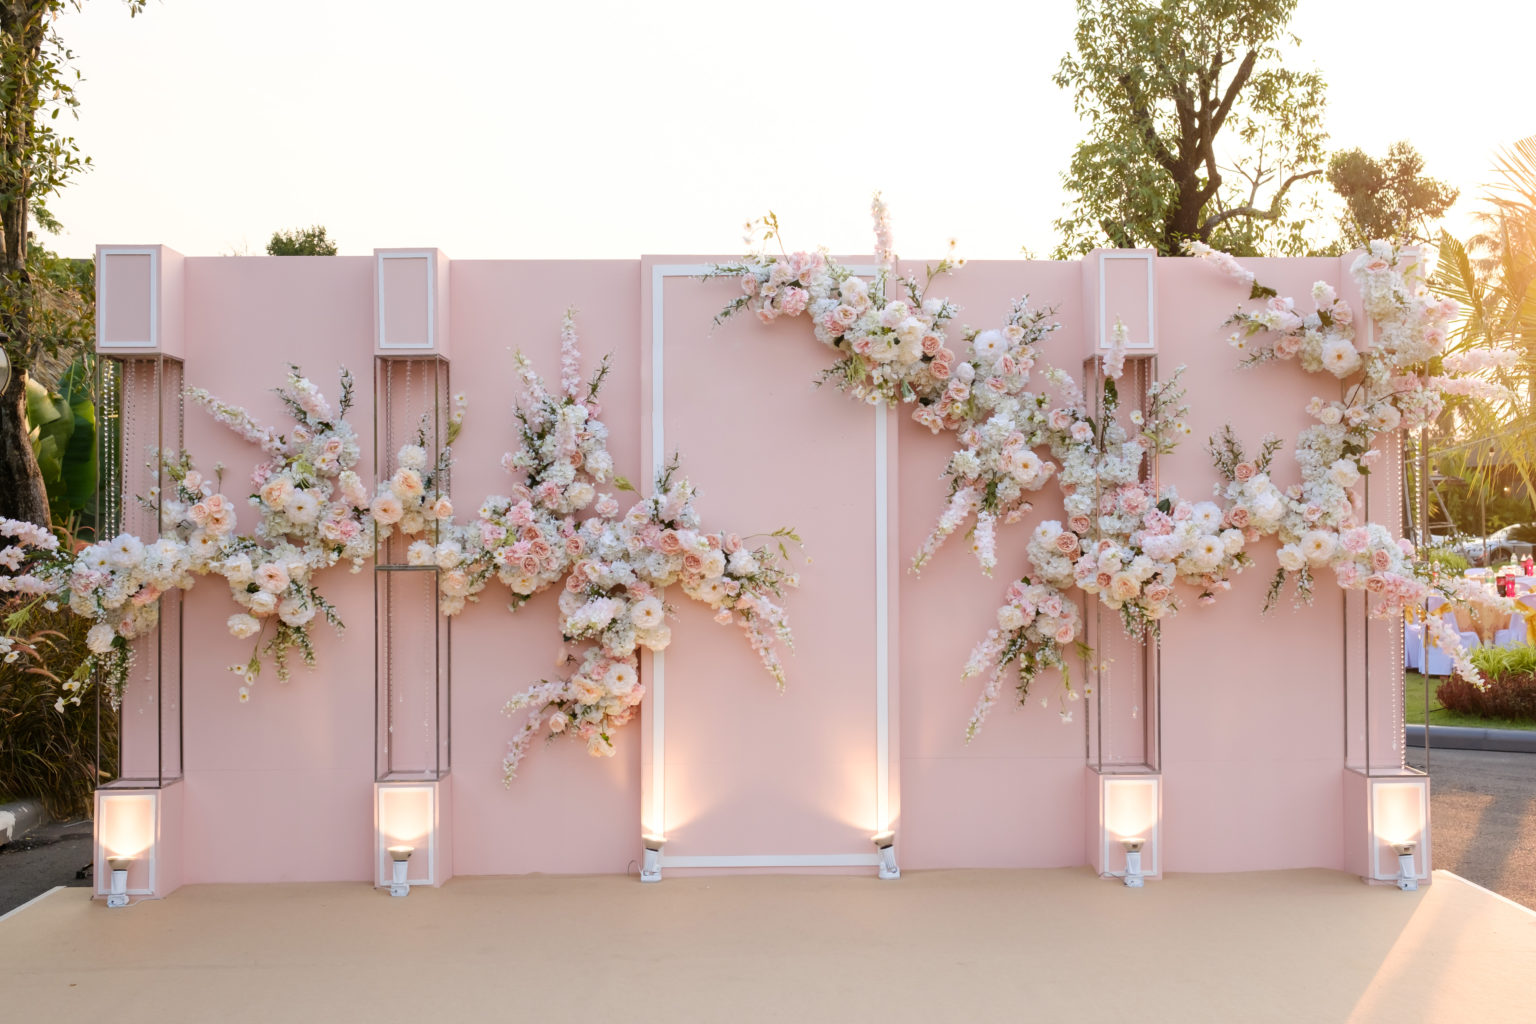 70 Awe Inspiring Wedding Ceremony Backdrop Ideas You Can Steal 0198